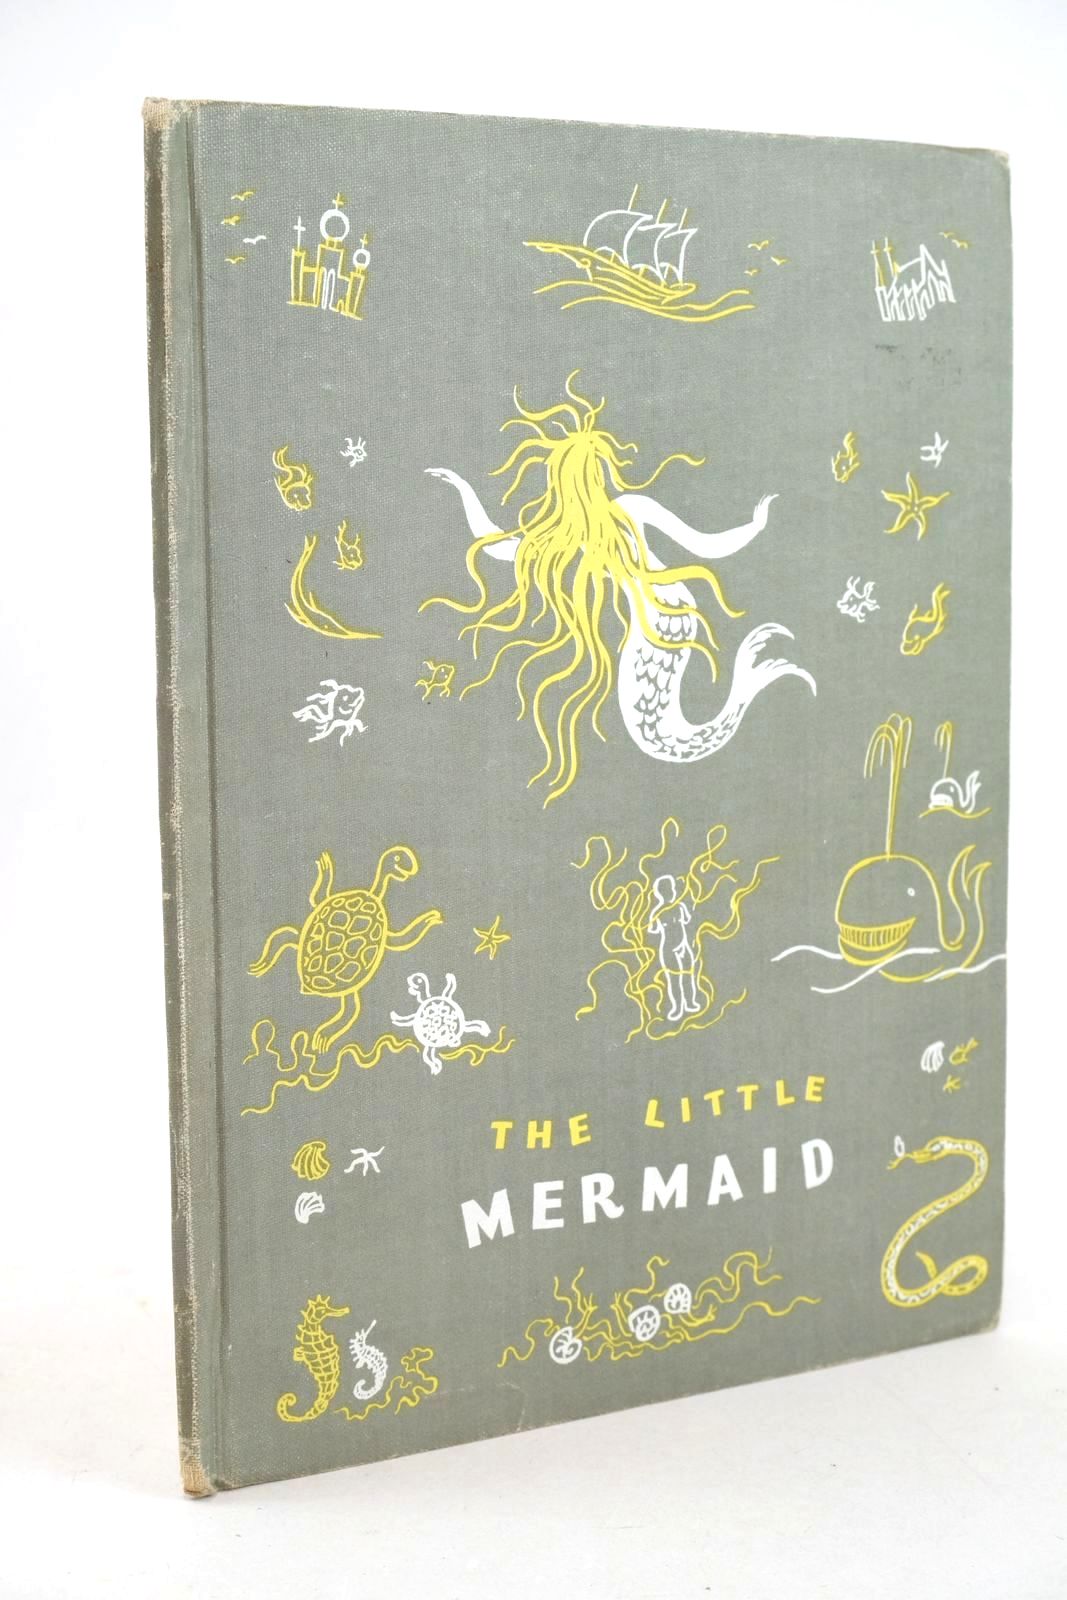 Photo of THE LITTLE MERMAID written by Andersen, Hans Christian Pennell, Cathrine illustrated by Andre, Wegner, Zoltan published by Collins (STOCK CODE: 1327905)  for sale by Stella & Rose's Books